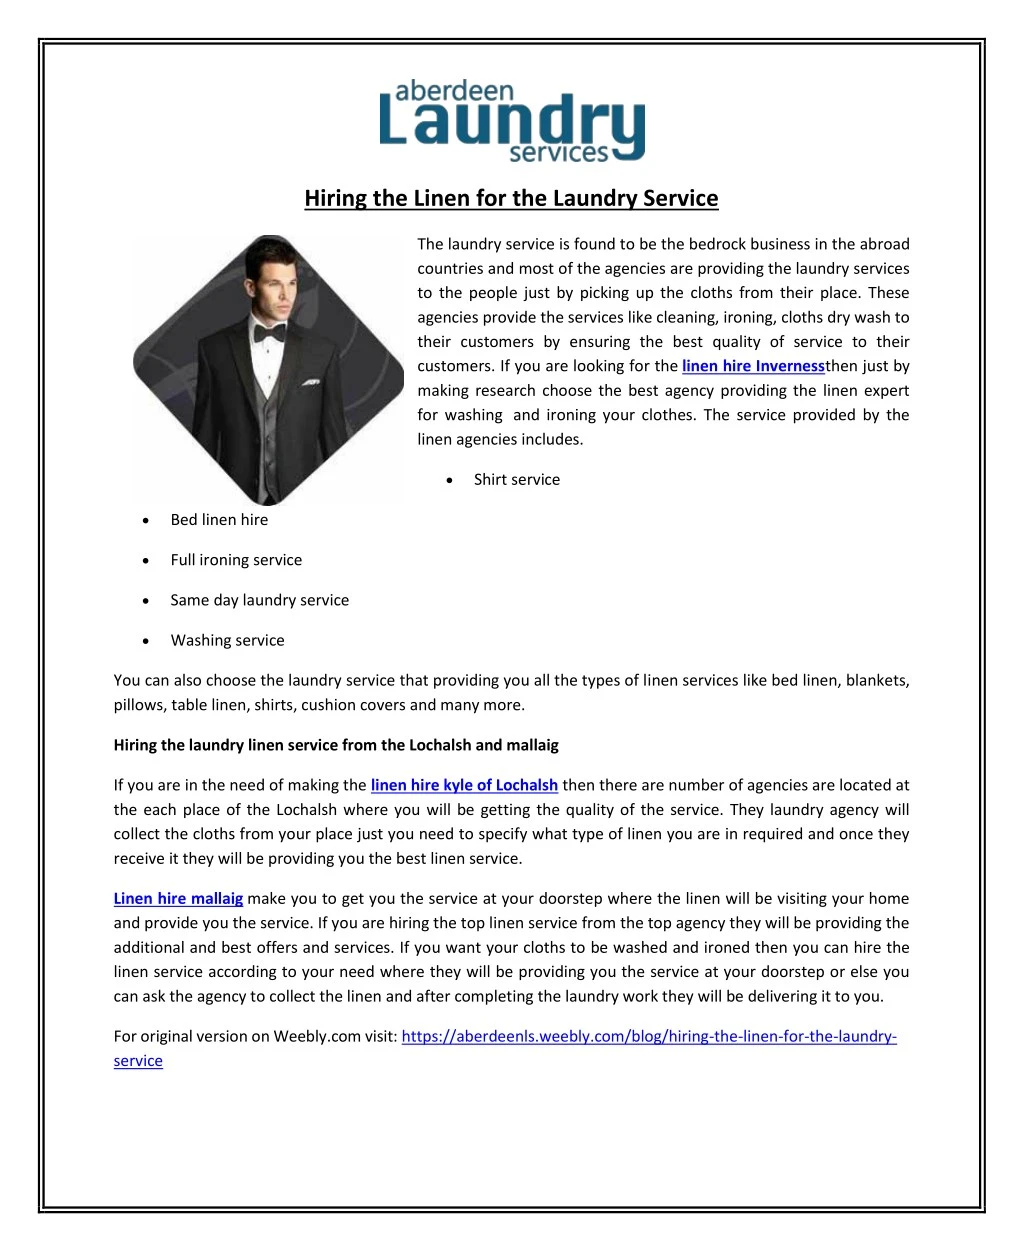 hiring the linen for the laundry service